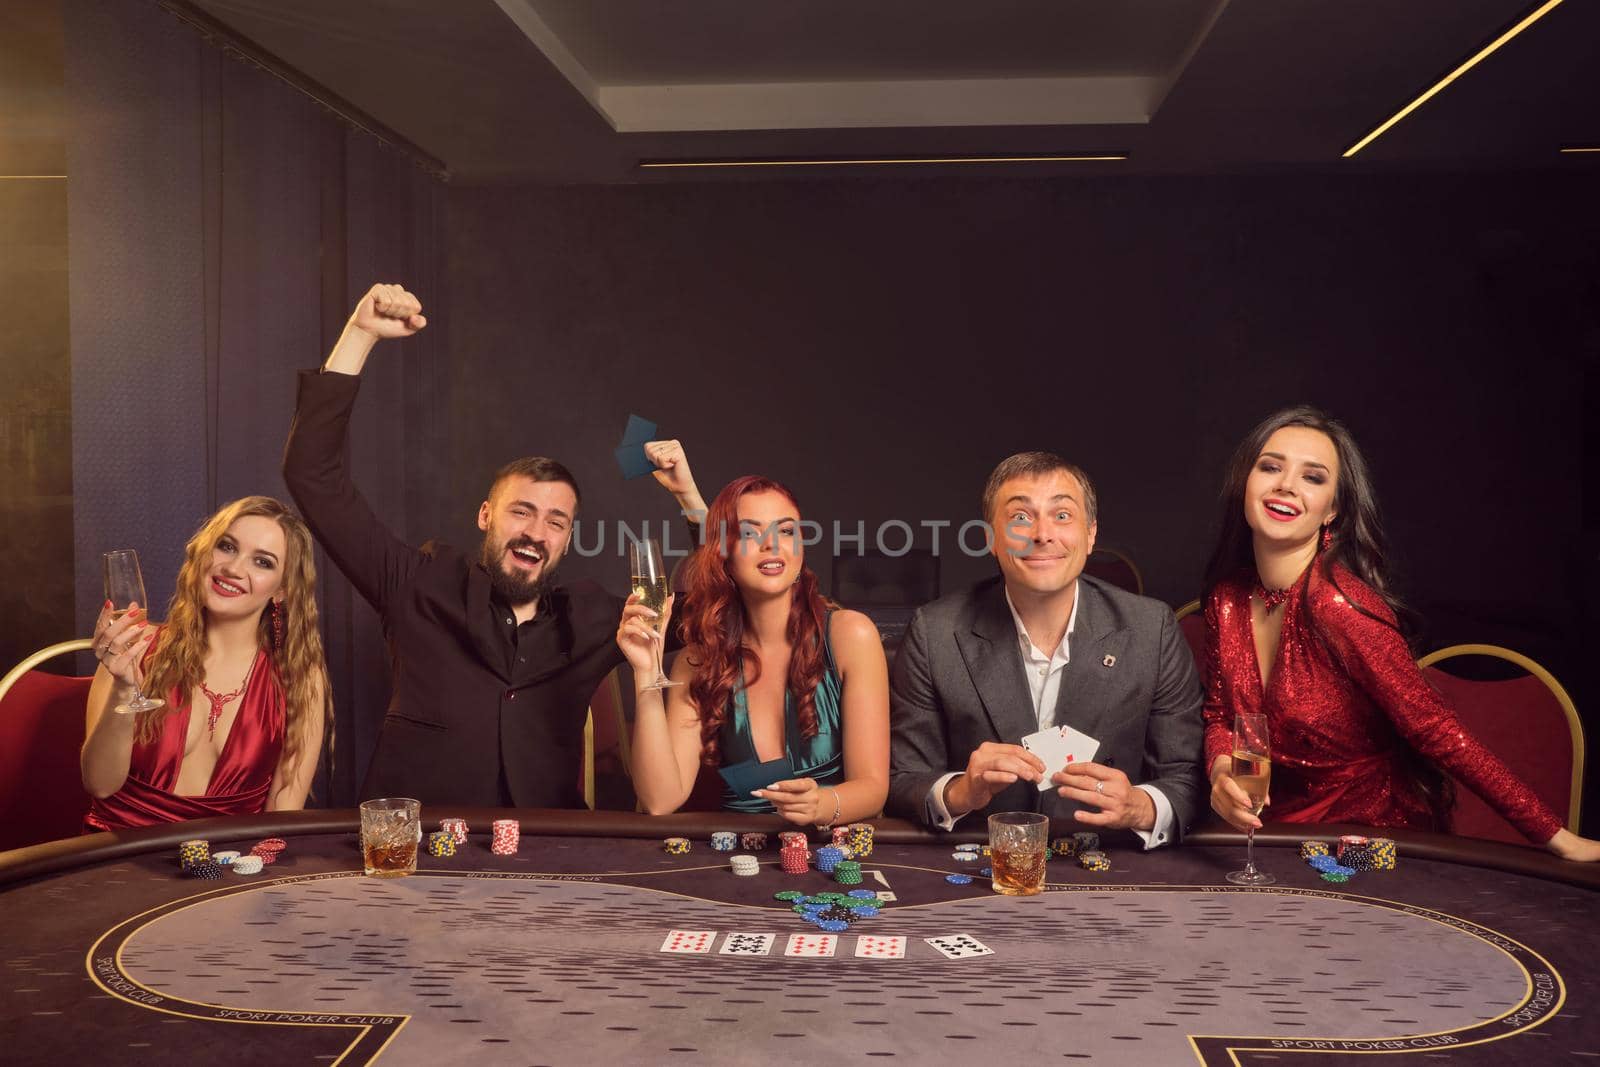 Optimistic buddies are playing poker at casino. They are celebrating their win, smiling and looking vey excited while posing sitting at the table against a dark smoke background in a ray of a spotlight. Cards, chips, money, alcohol, gambling, entertainment concept.